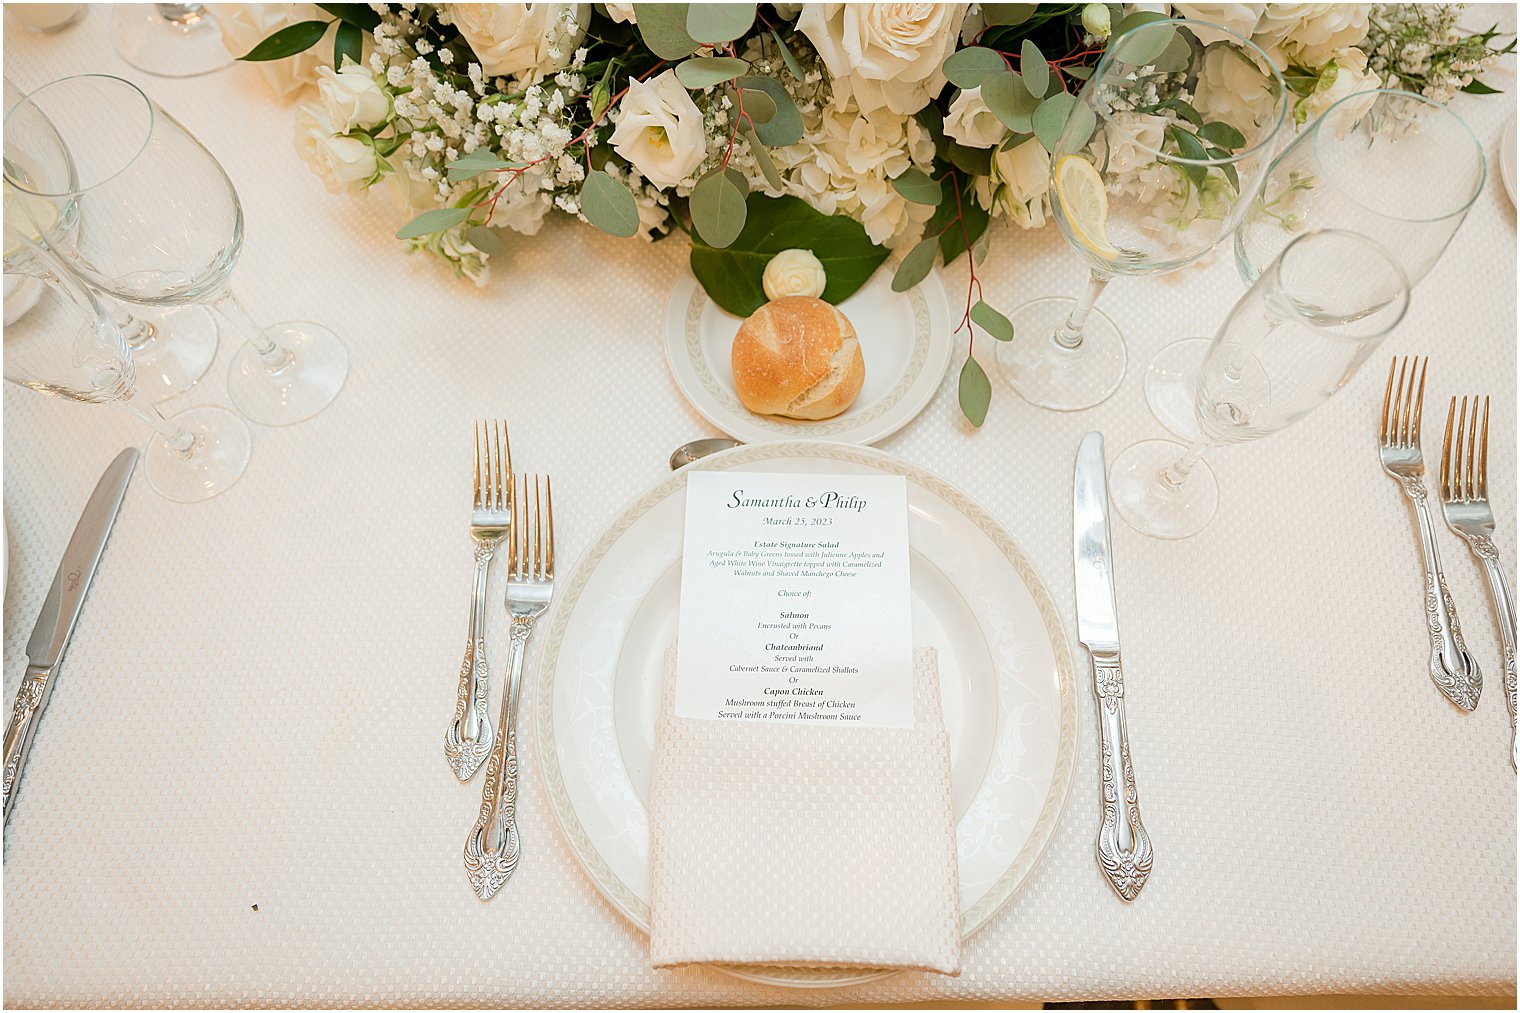 place setting with white plates, napkins and menu cards 